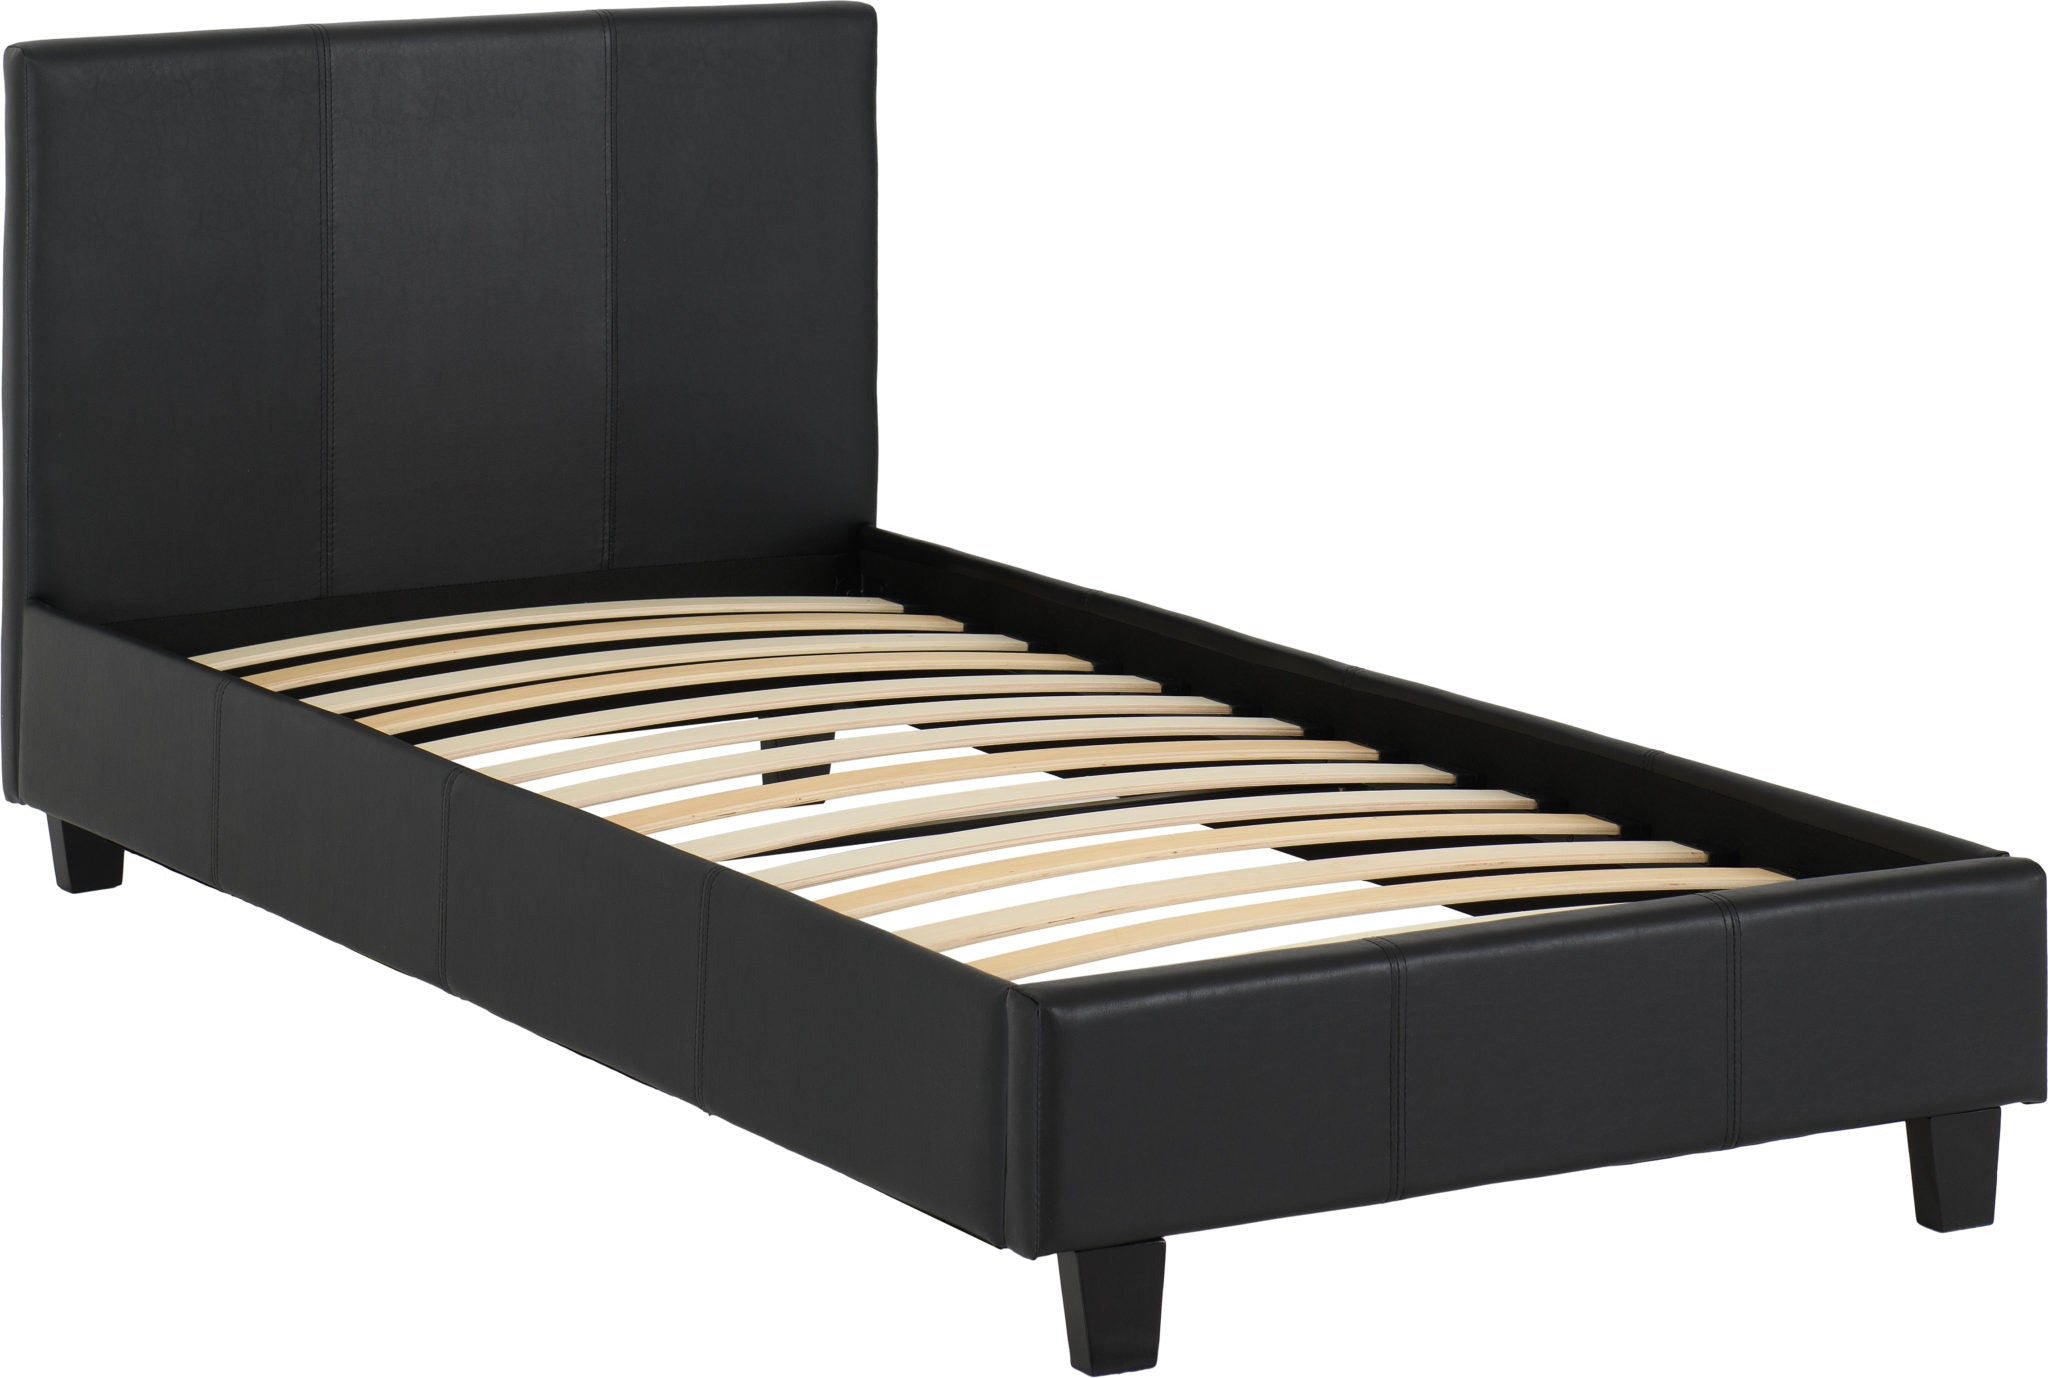 black faux leather bed